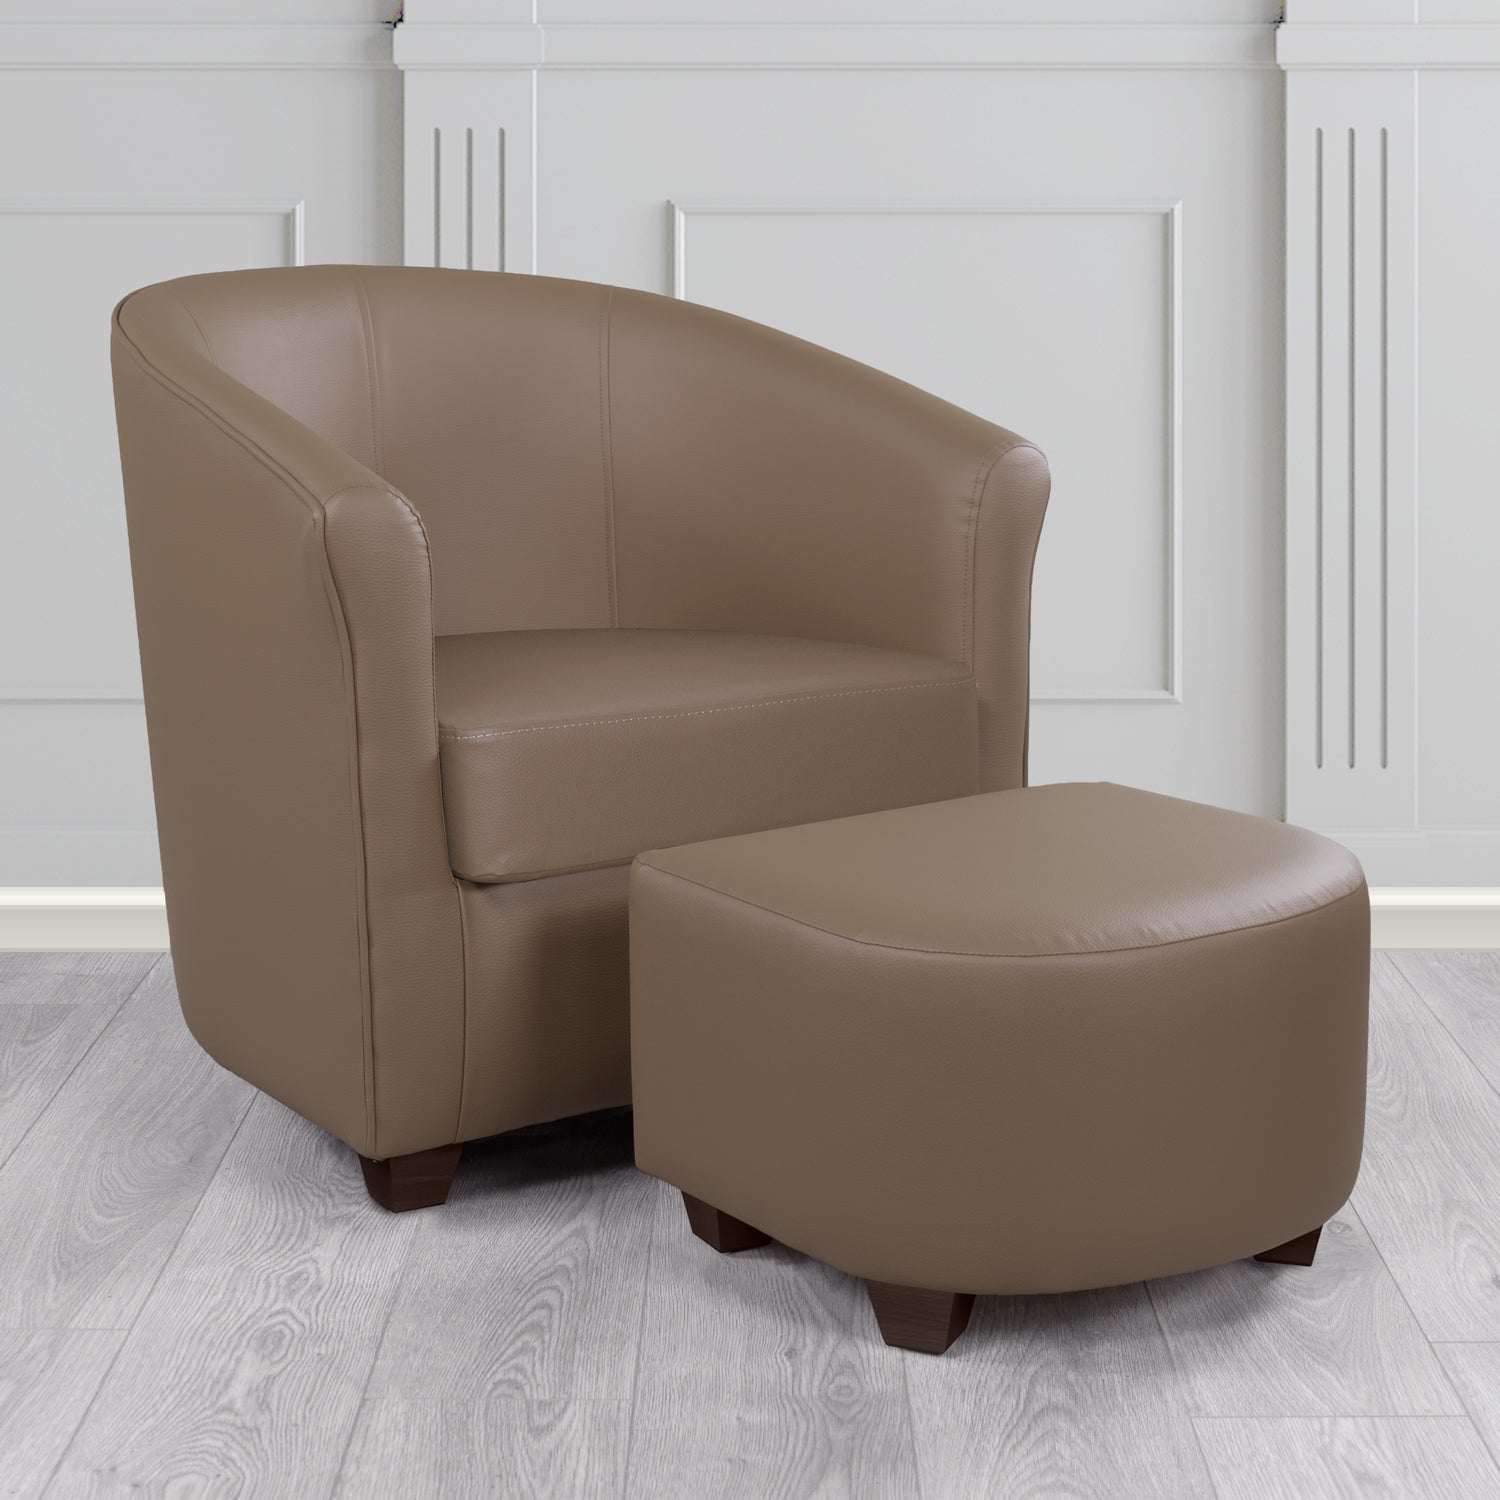 Cannes Tub Chair with Footstool Set in Just Colour Pecan Crib 5 Faux Leather - The Tub Chair Shop